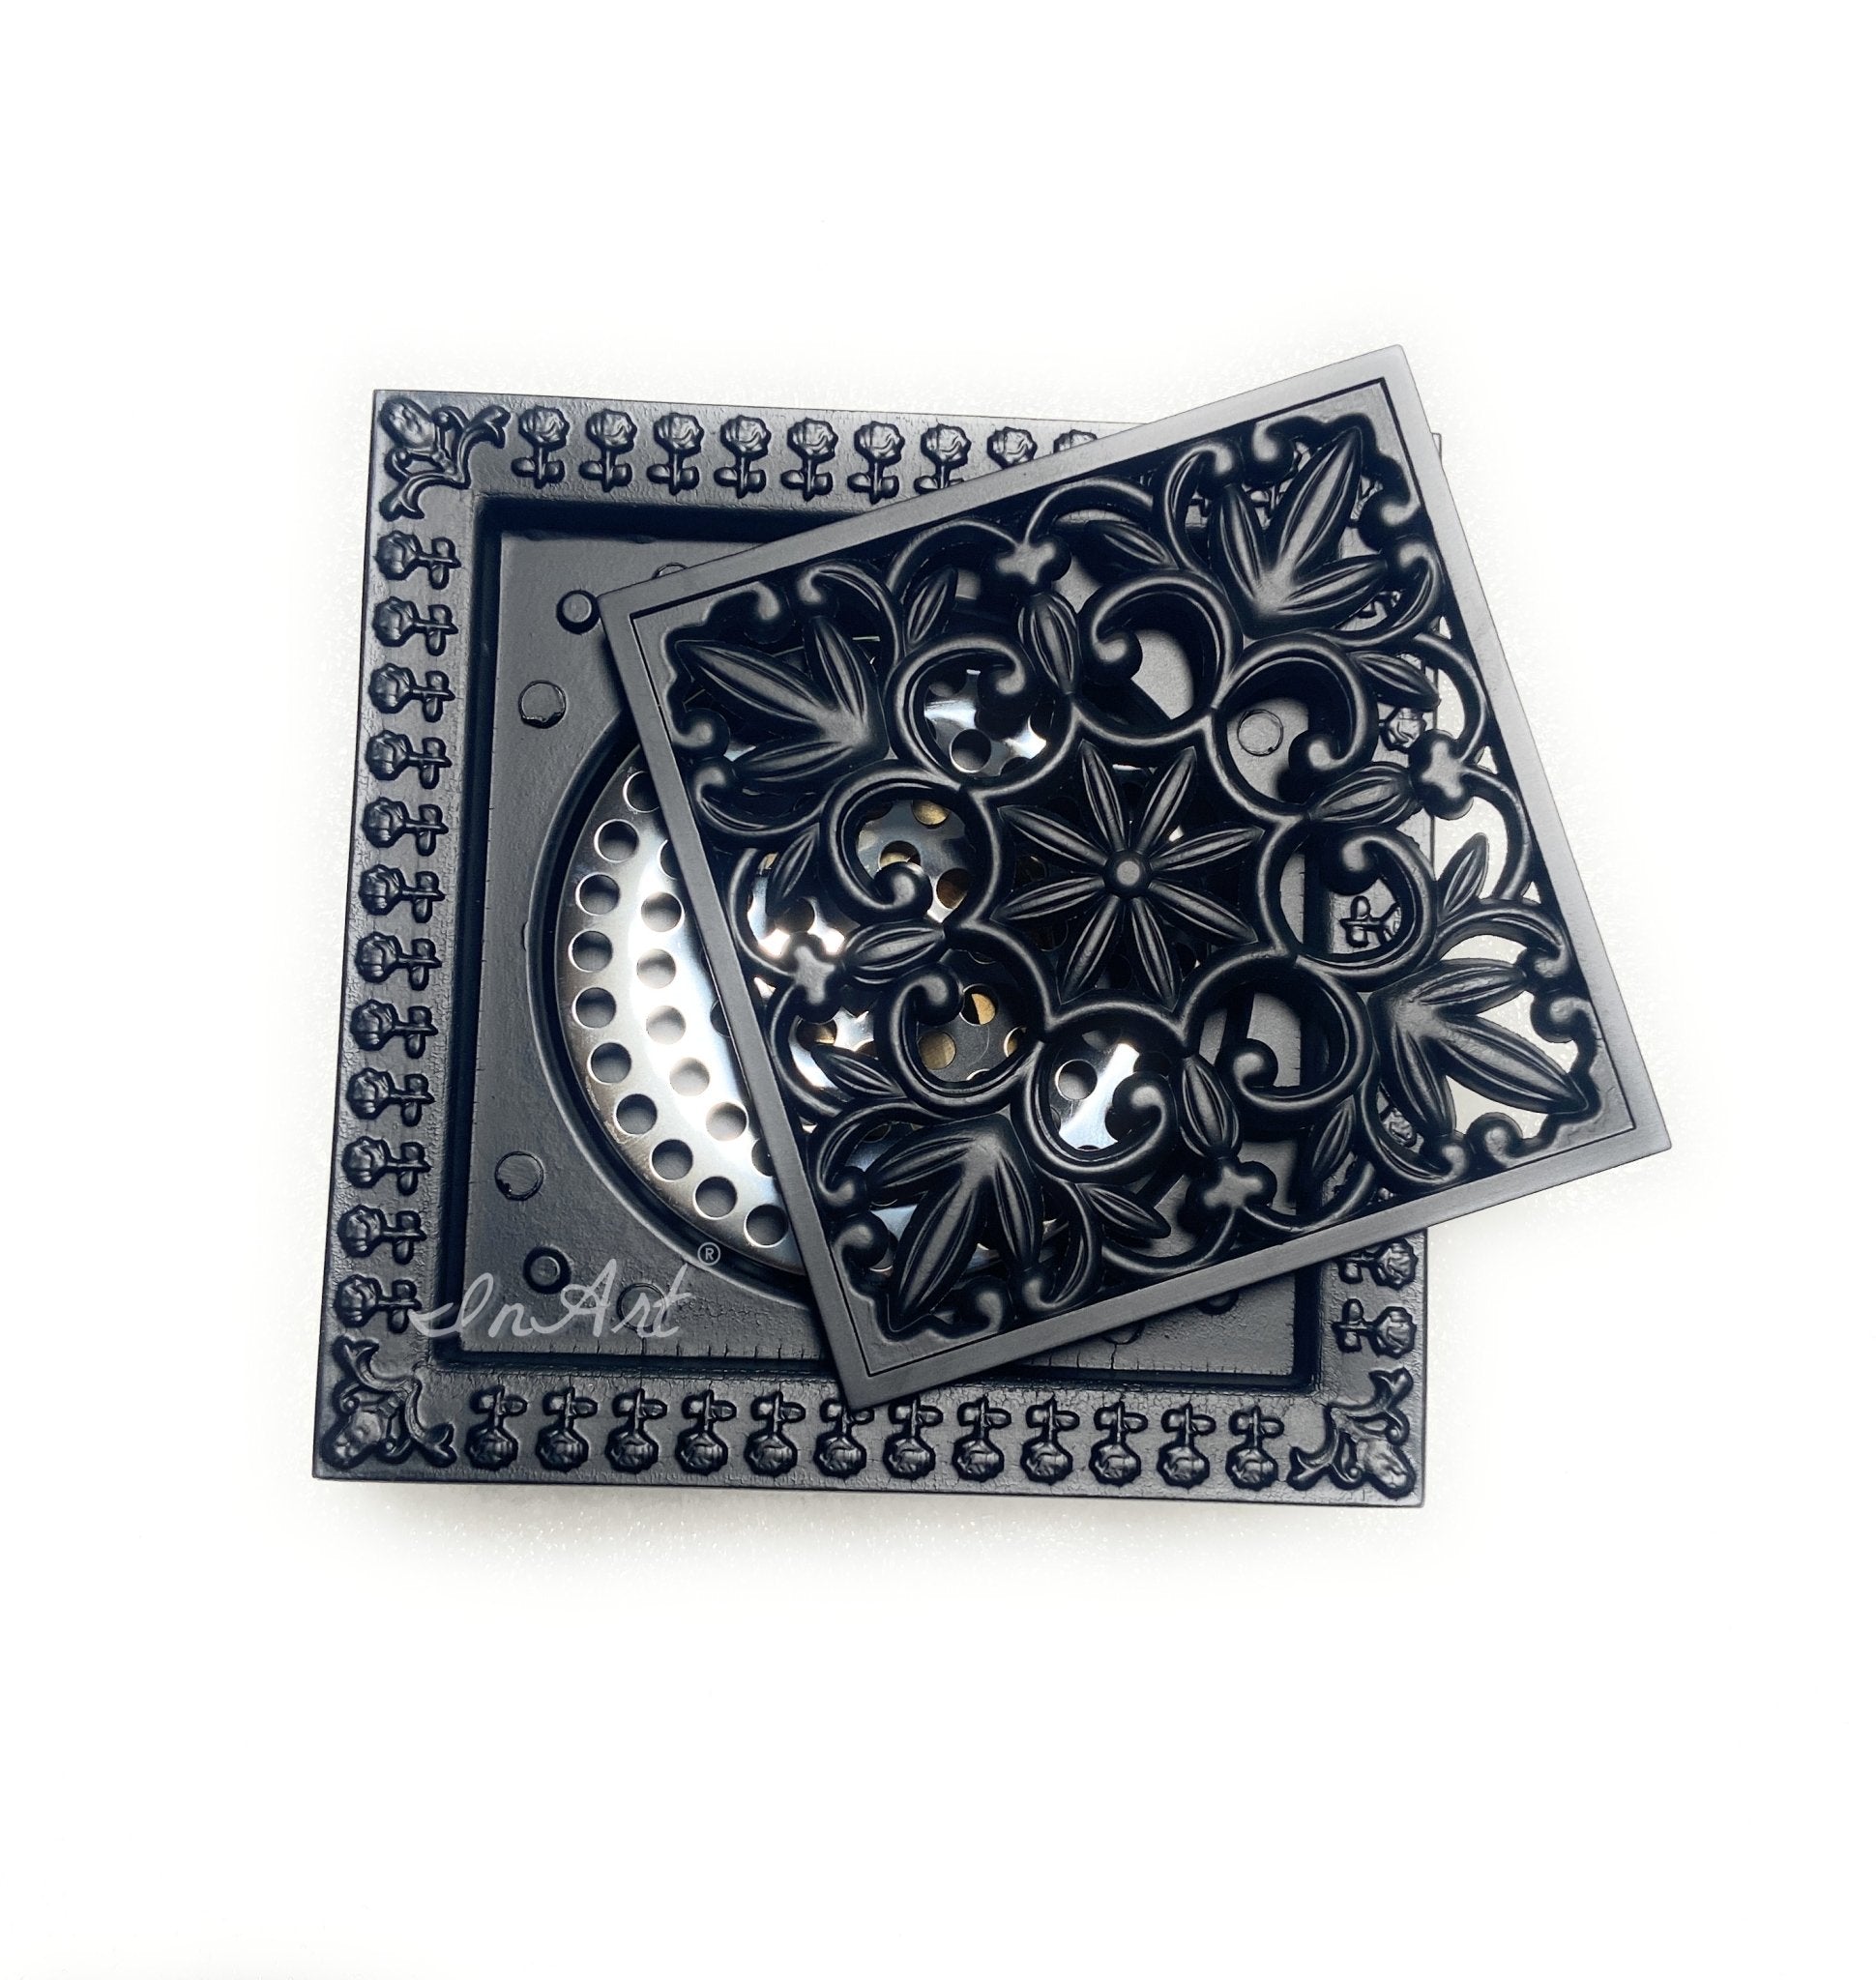 InArt Brass Square Shower Floor Drain with Removable Cover Grid Grate 5 inch Long Black Matt Color Floral Pattern - InArt-Studio-USA